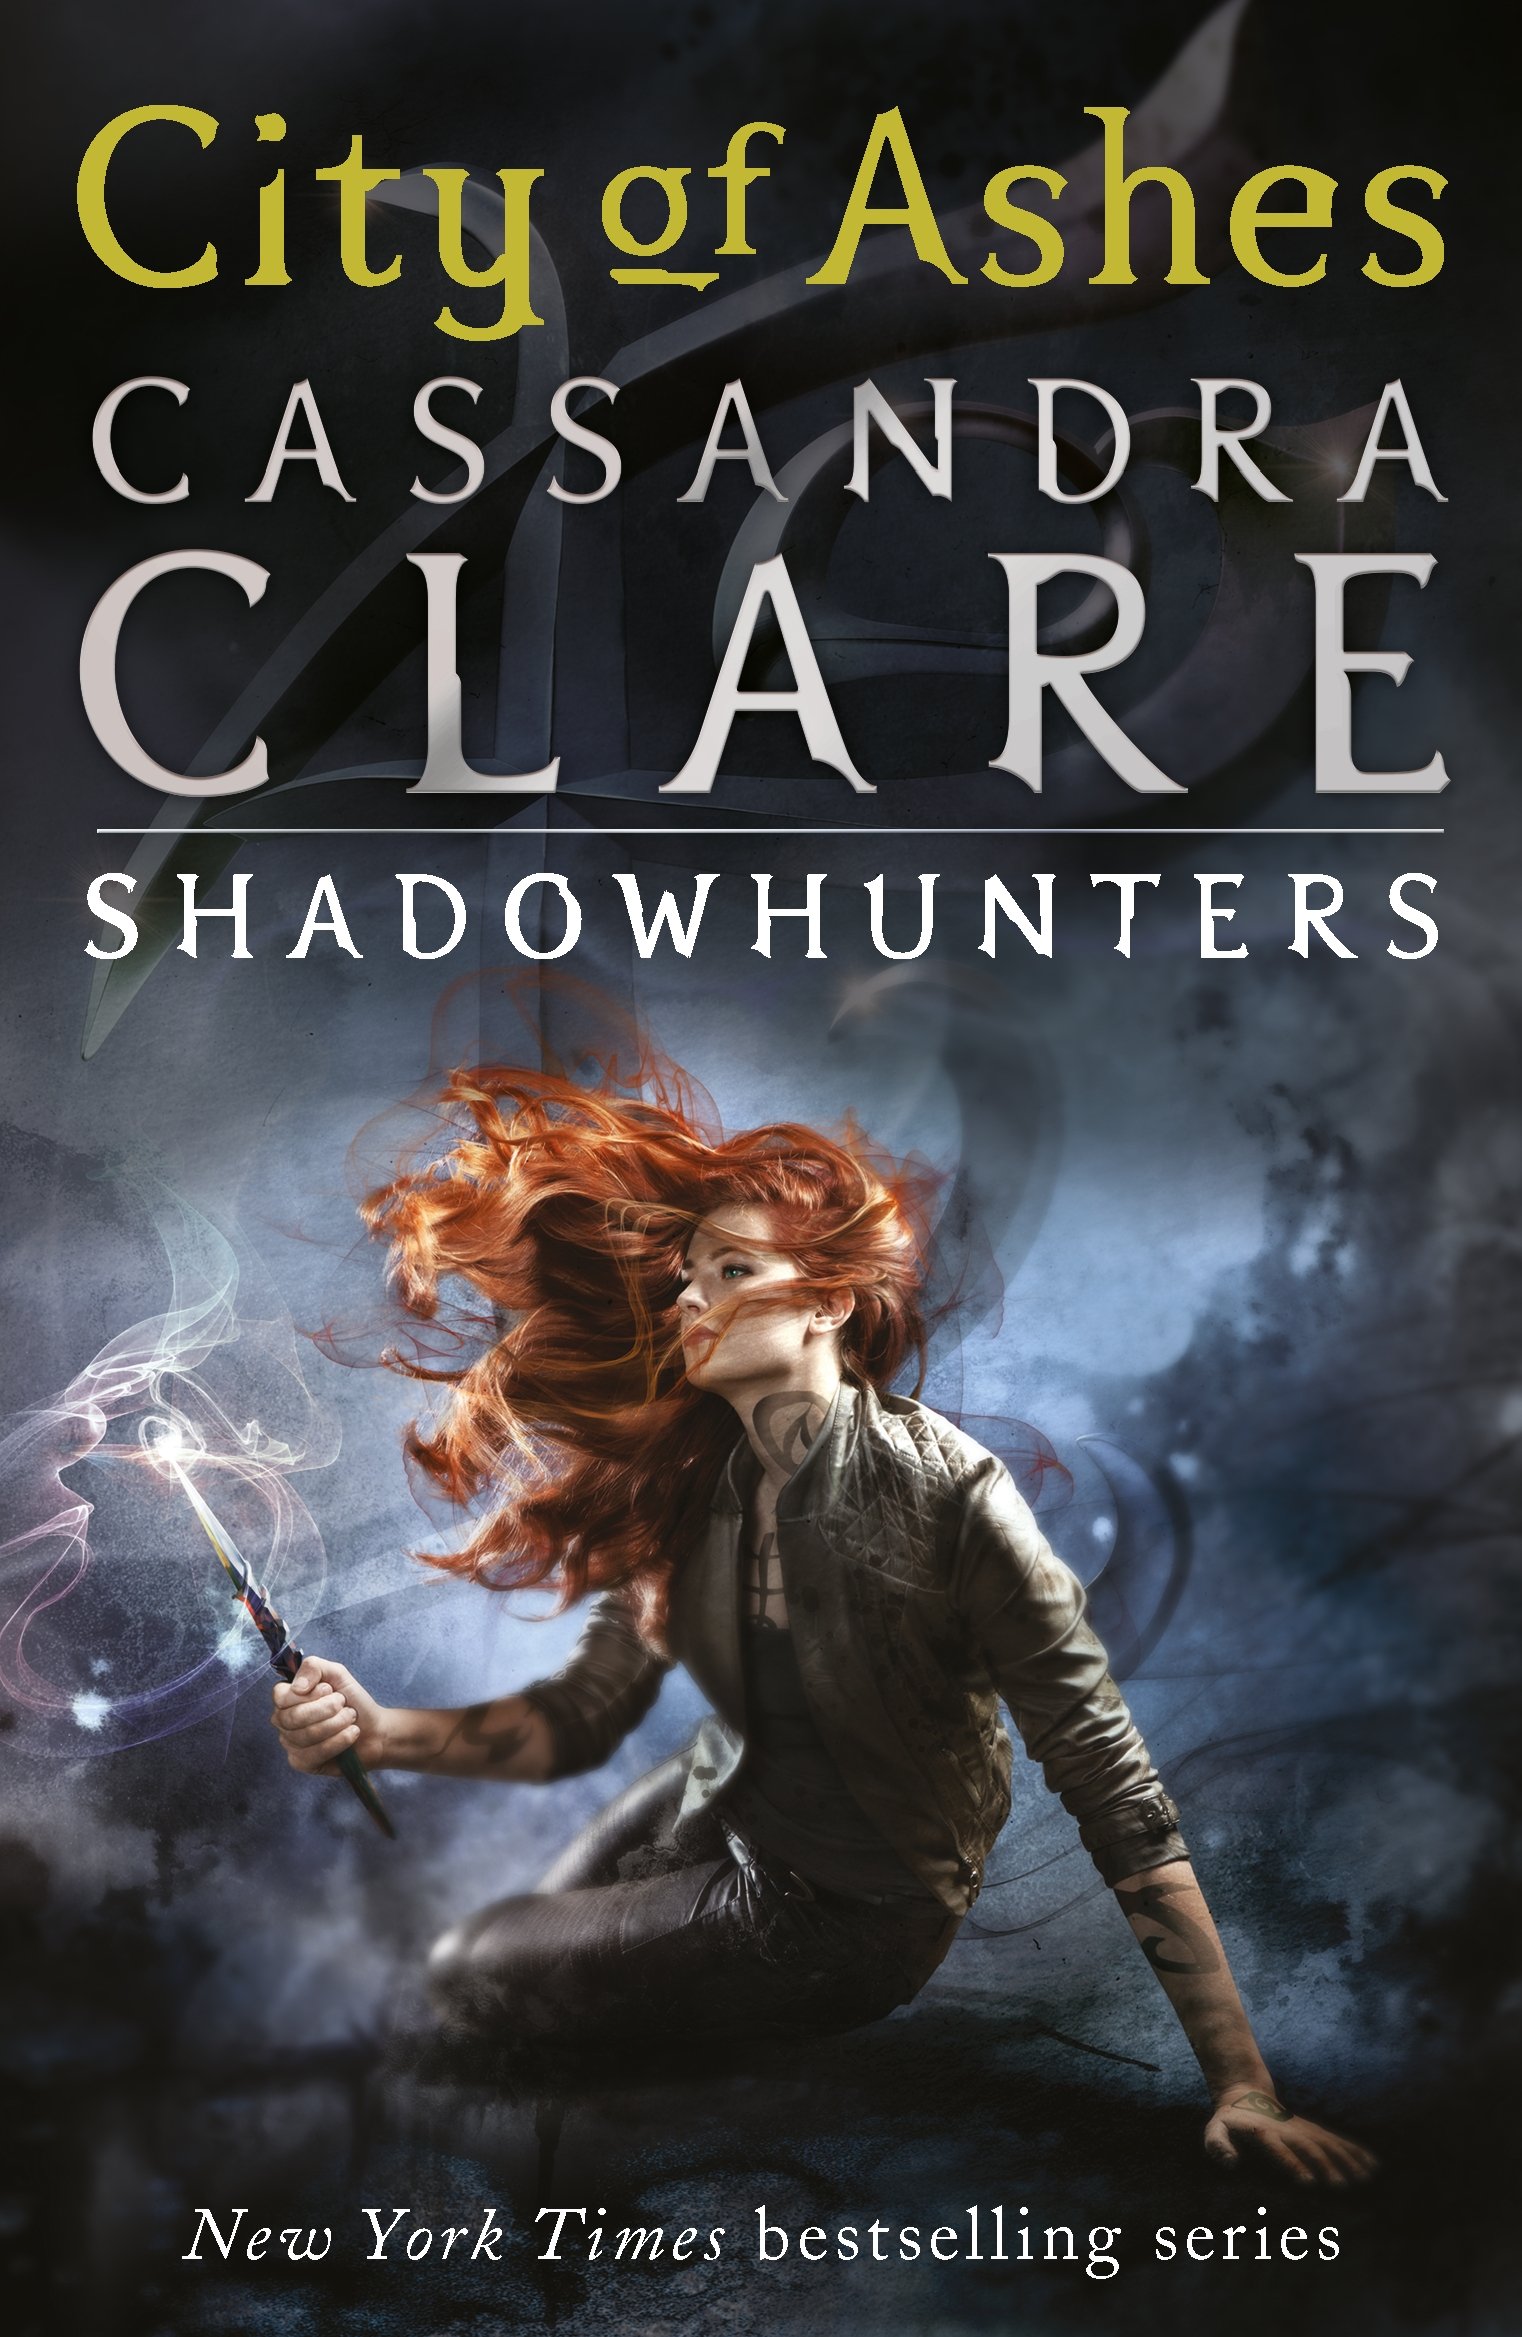 City of Ashes (The Mortal Instruments series, Book2)- Cassandra Clare